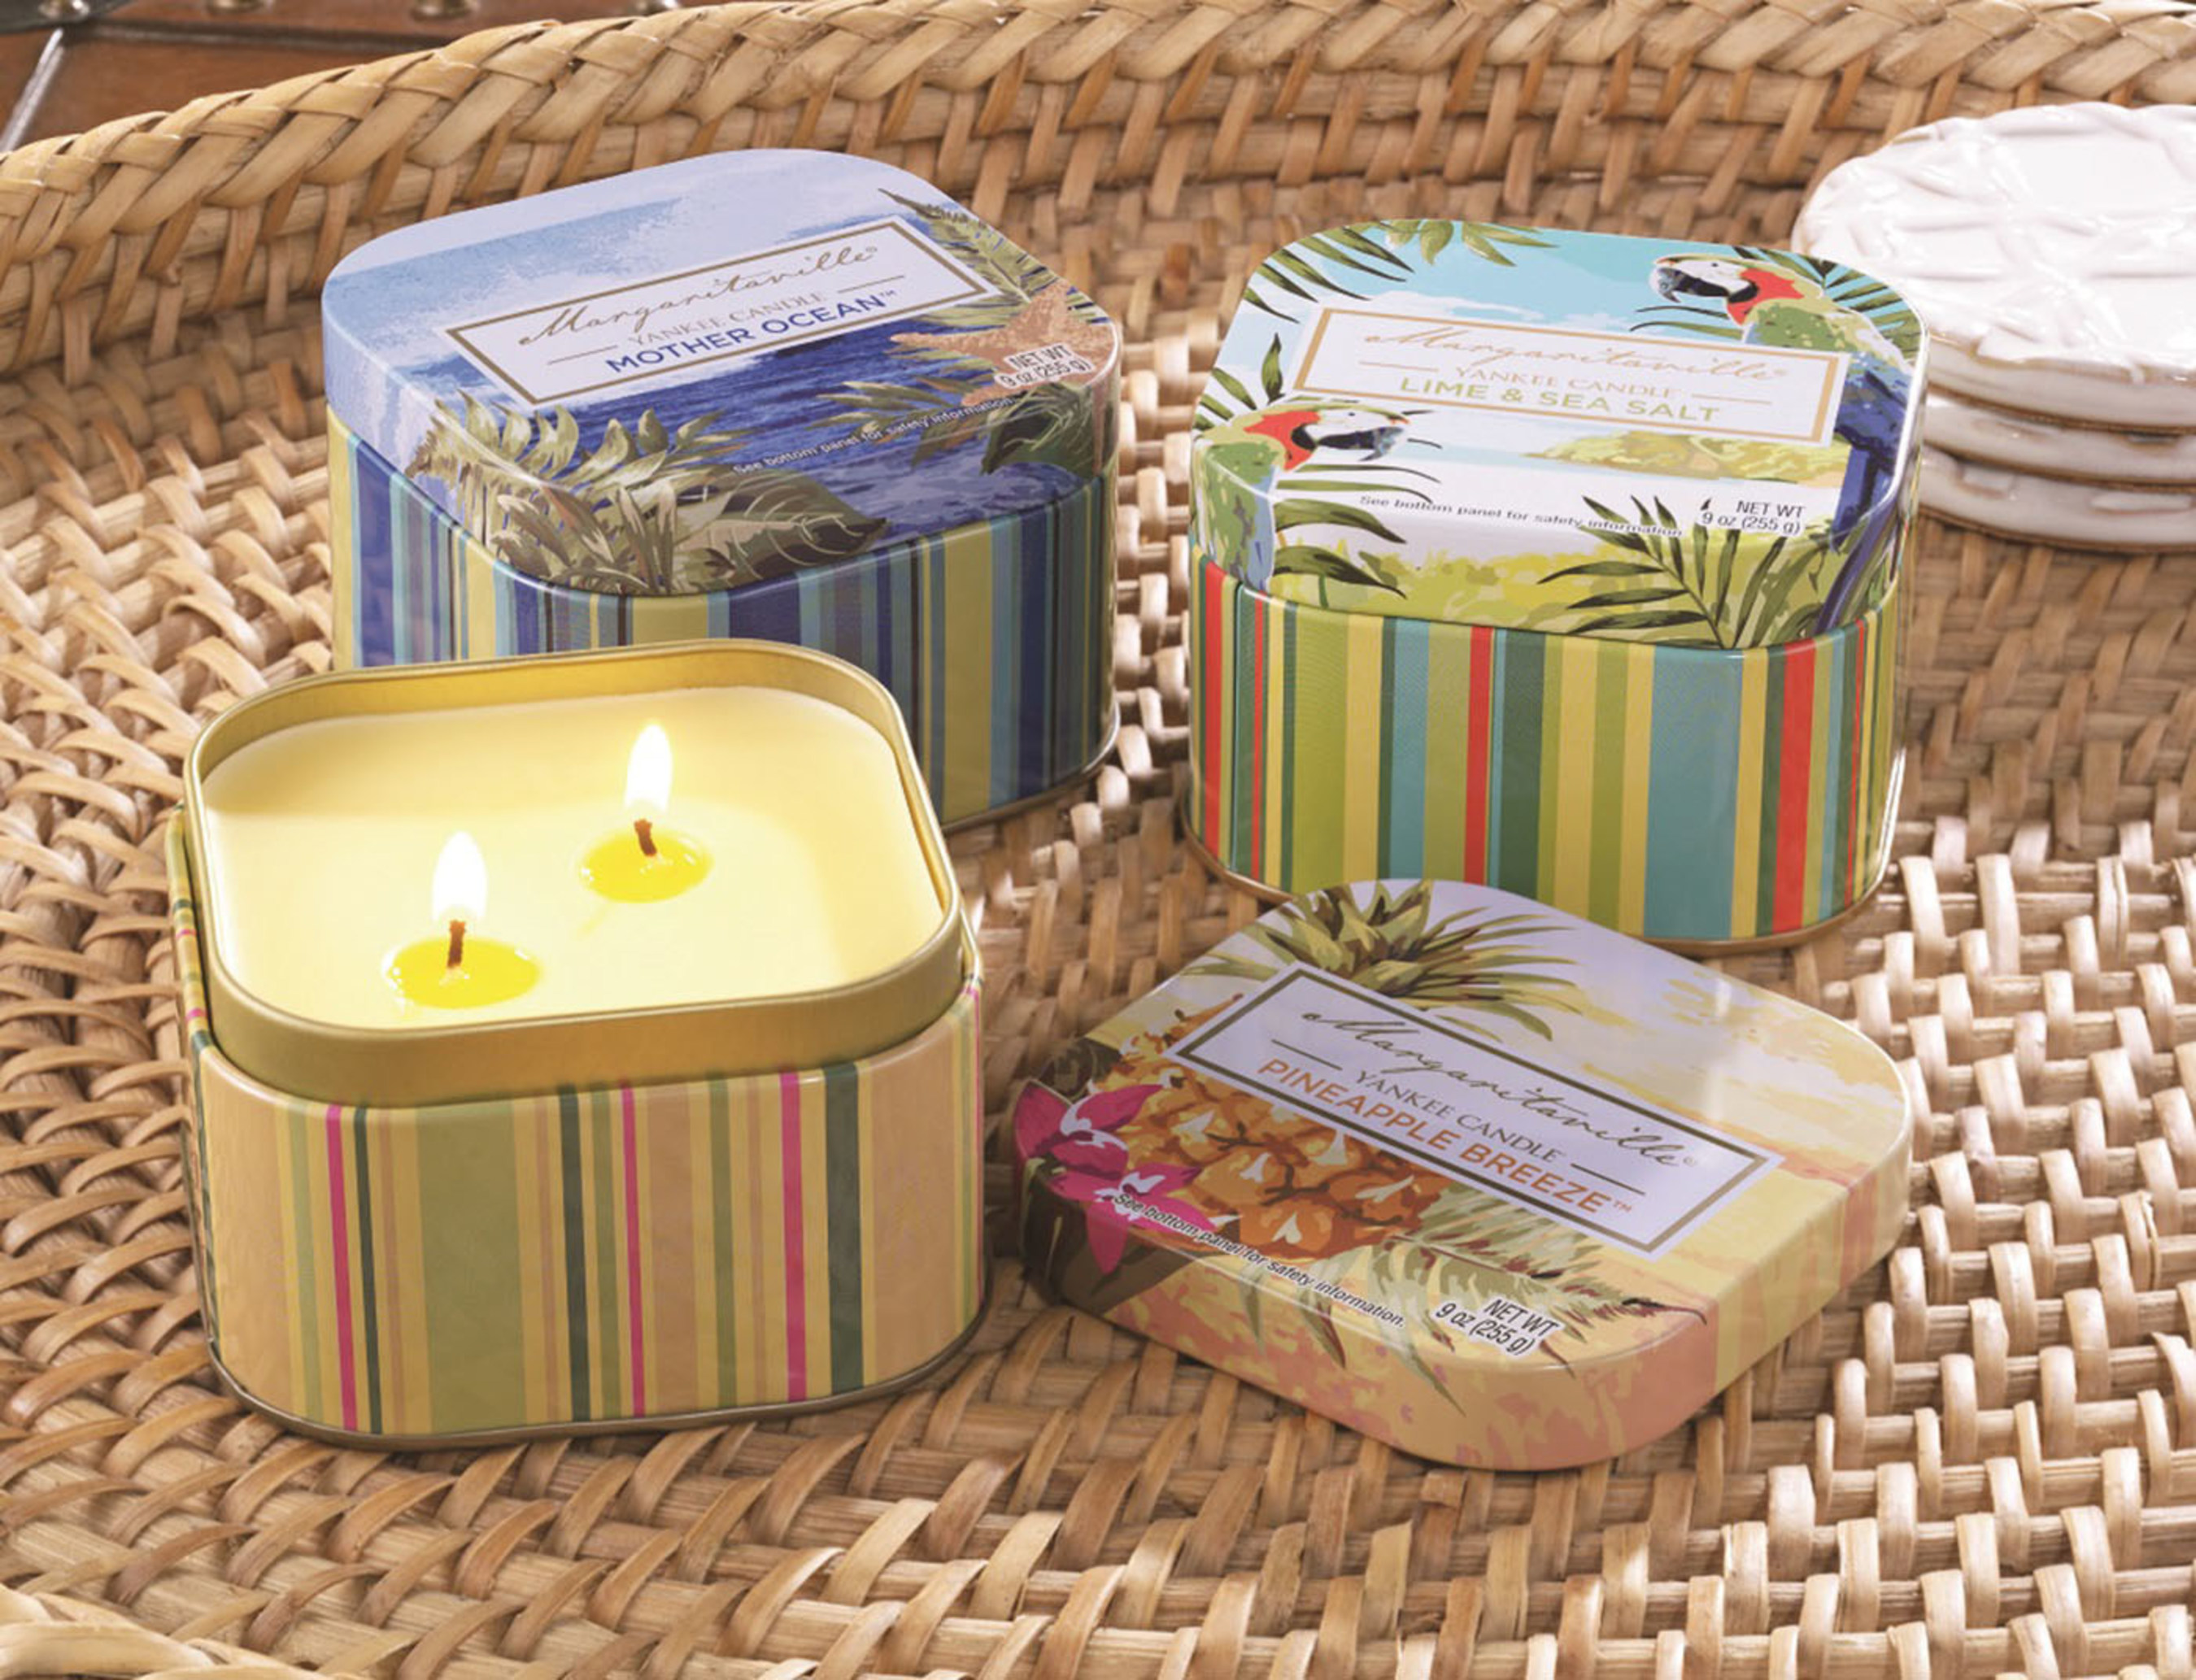 Yankee Candle's Margaritaville(R) Collection transports fans to paradise with four new tropical fragrances inspired by iconic Jimmy Buffett lyrics.